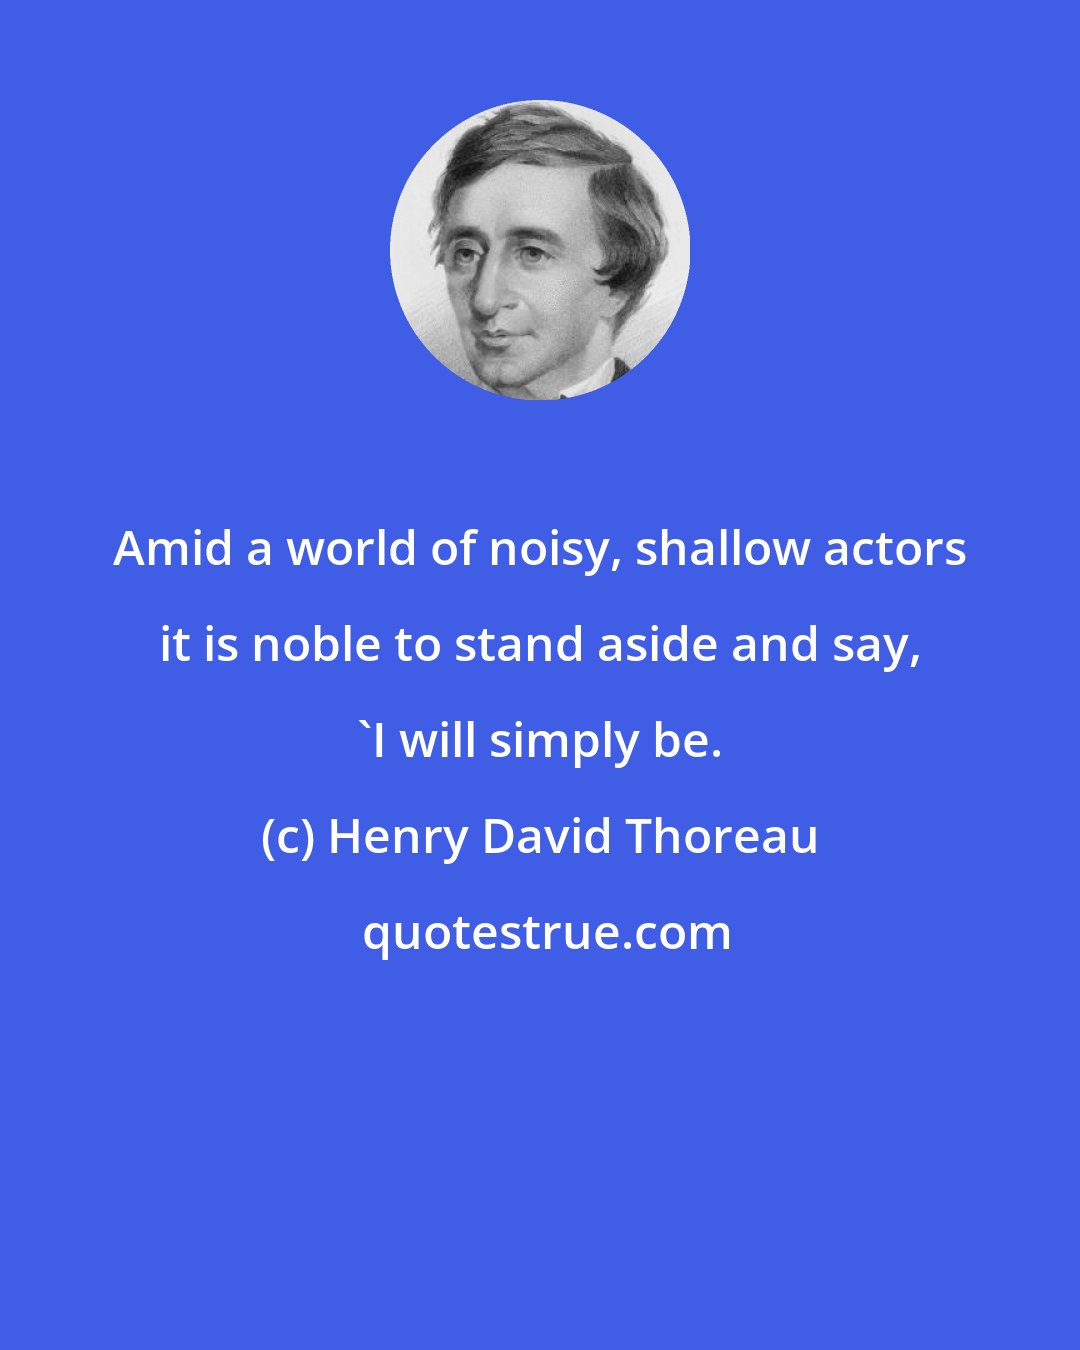 Henry David Thoreau: Amid a world of noisy, shallow actors it is noble to stand aside and say, 'I will simply be.